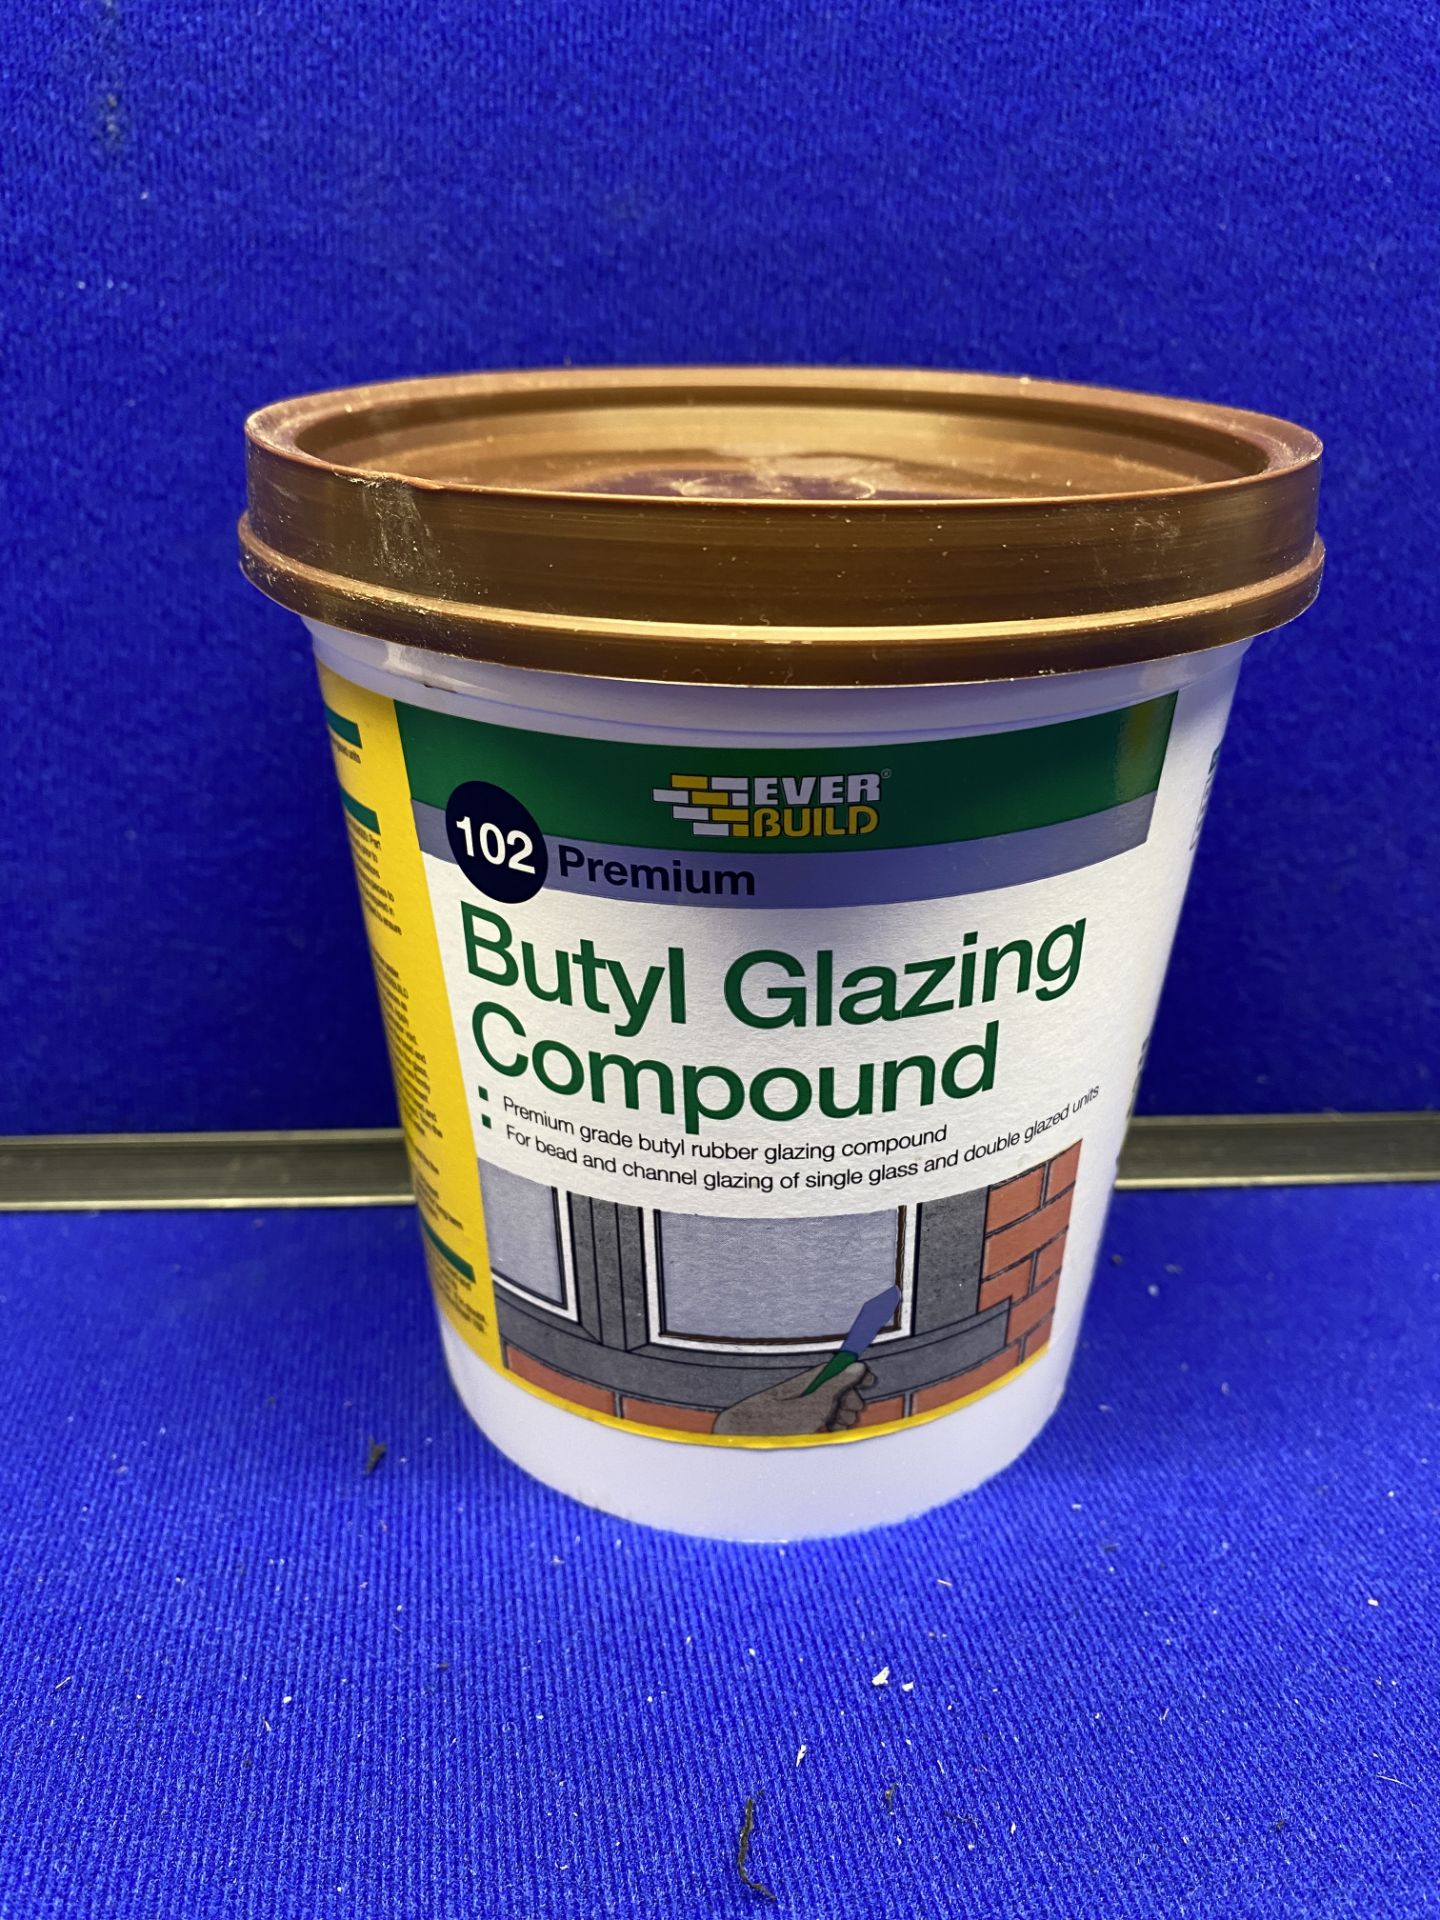 Mixed Lot Of 2kg Tubs Of Everbuild Butyl Glazing Compound & Linseed Oil Putty - See Description - Image 2 of 5